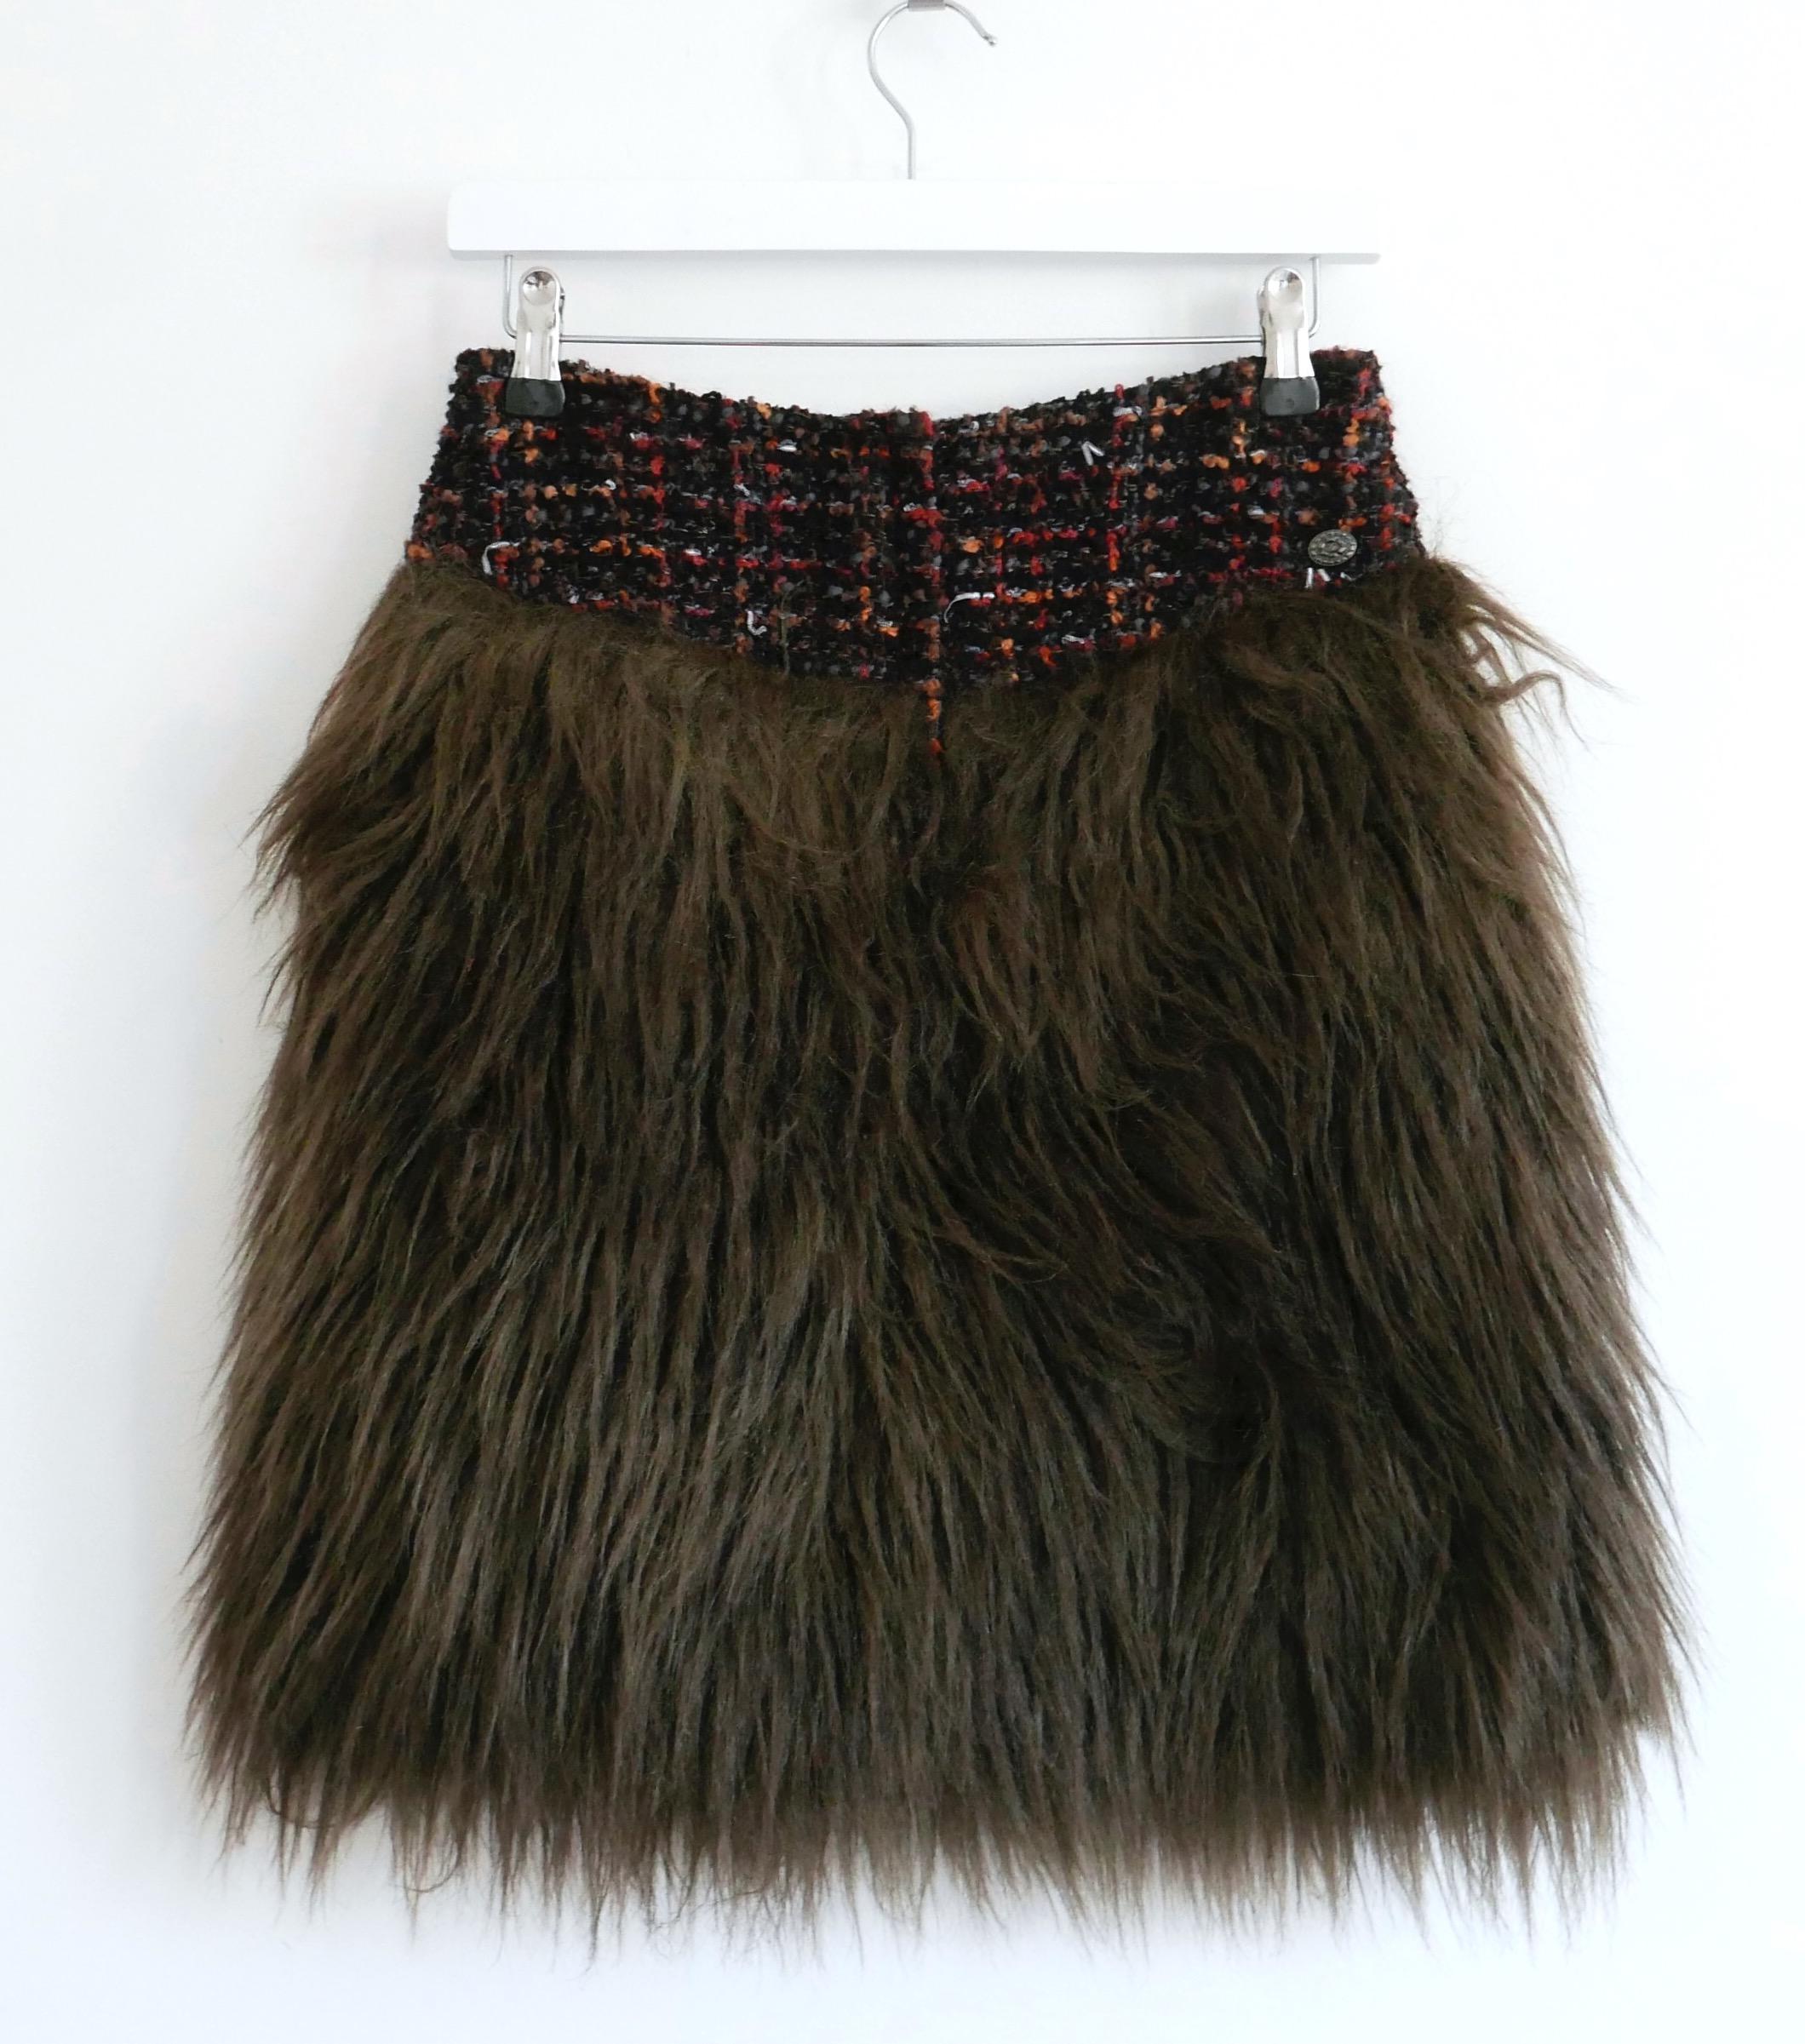 Iconic Chanel skirt from the legendary Fall 2010 collection. Unworn. Look 17 on the runway. A true collectors' piece. Made from wool mix, fantasy tweed and lush faux fur, it has zip fly to front, little CC badge to hip and black silk lining. Size